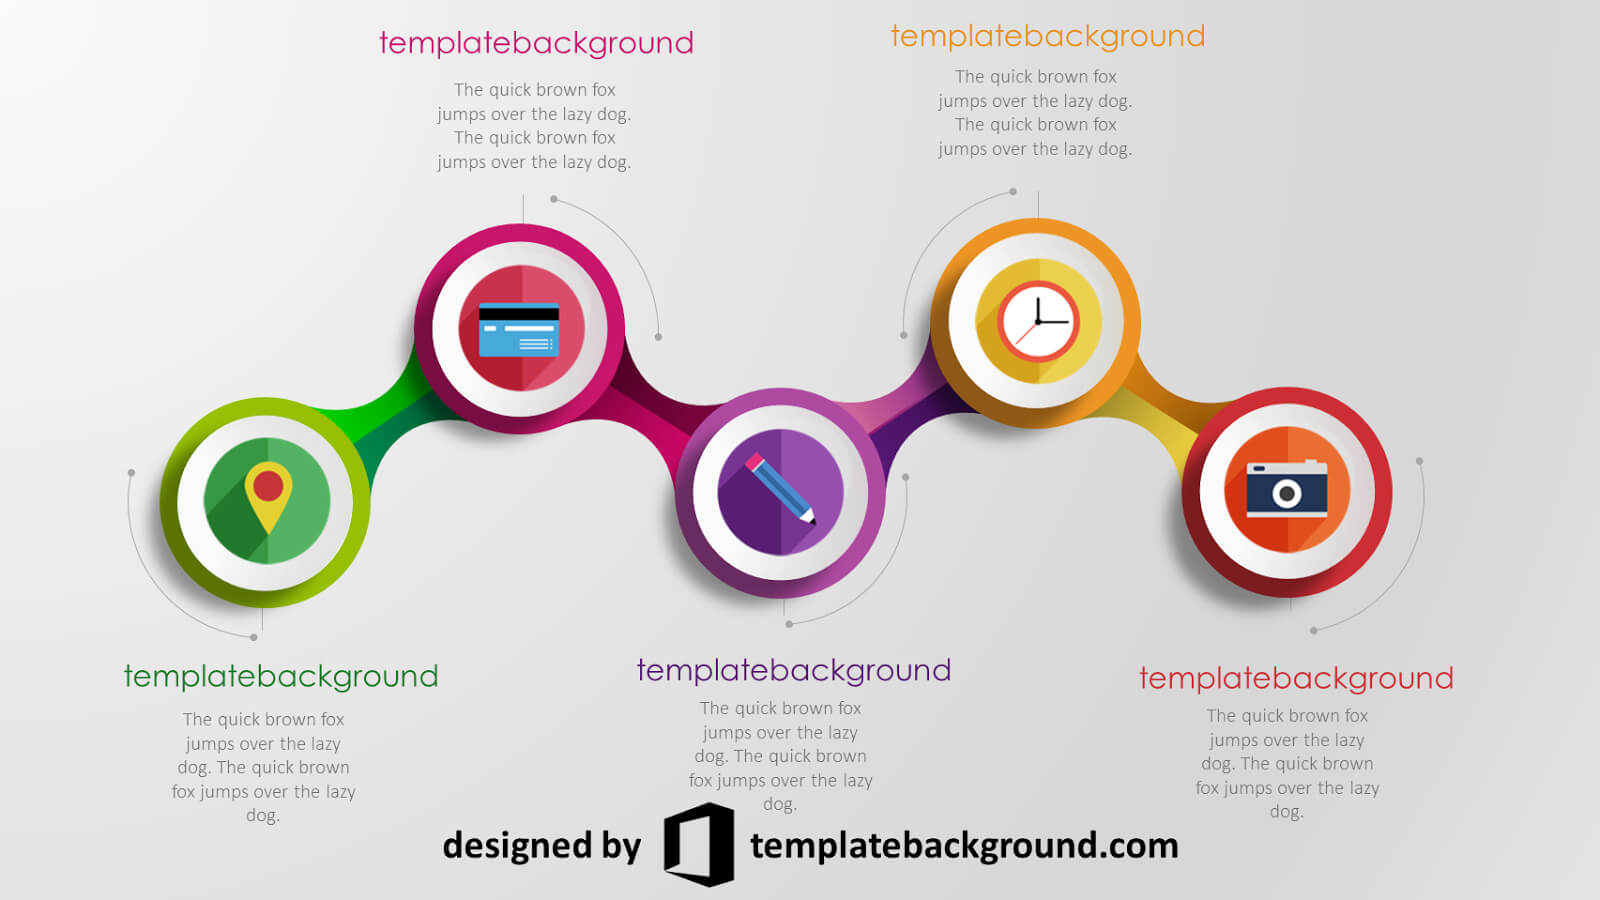 Animated Powerpoint Templates Free Download 2010 Borders With Powerpoint Animated Templates Free Download 2010